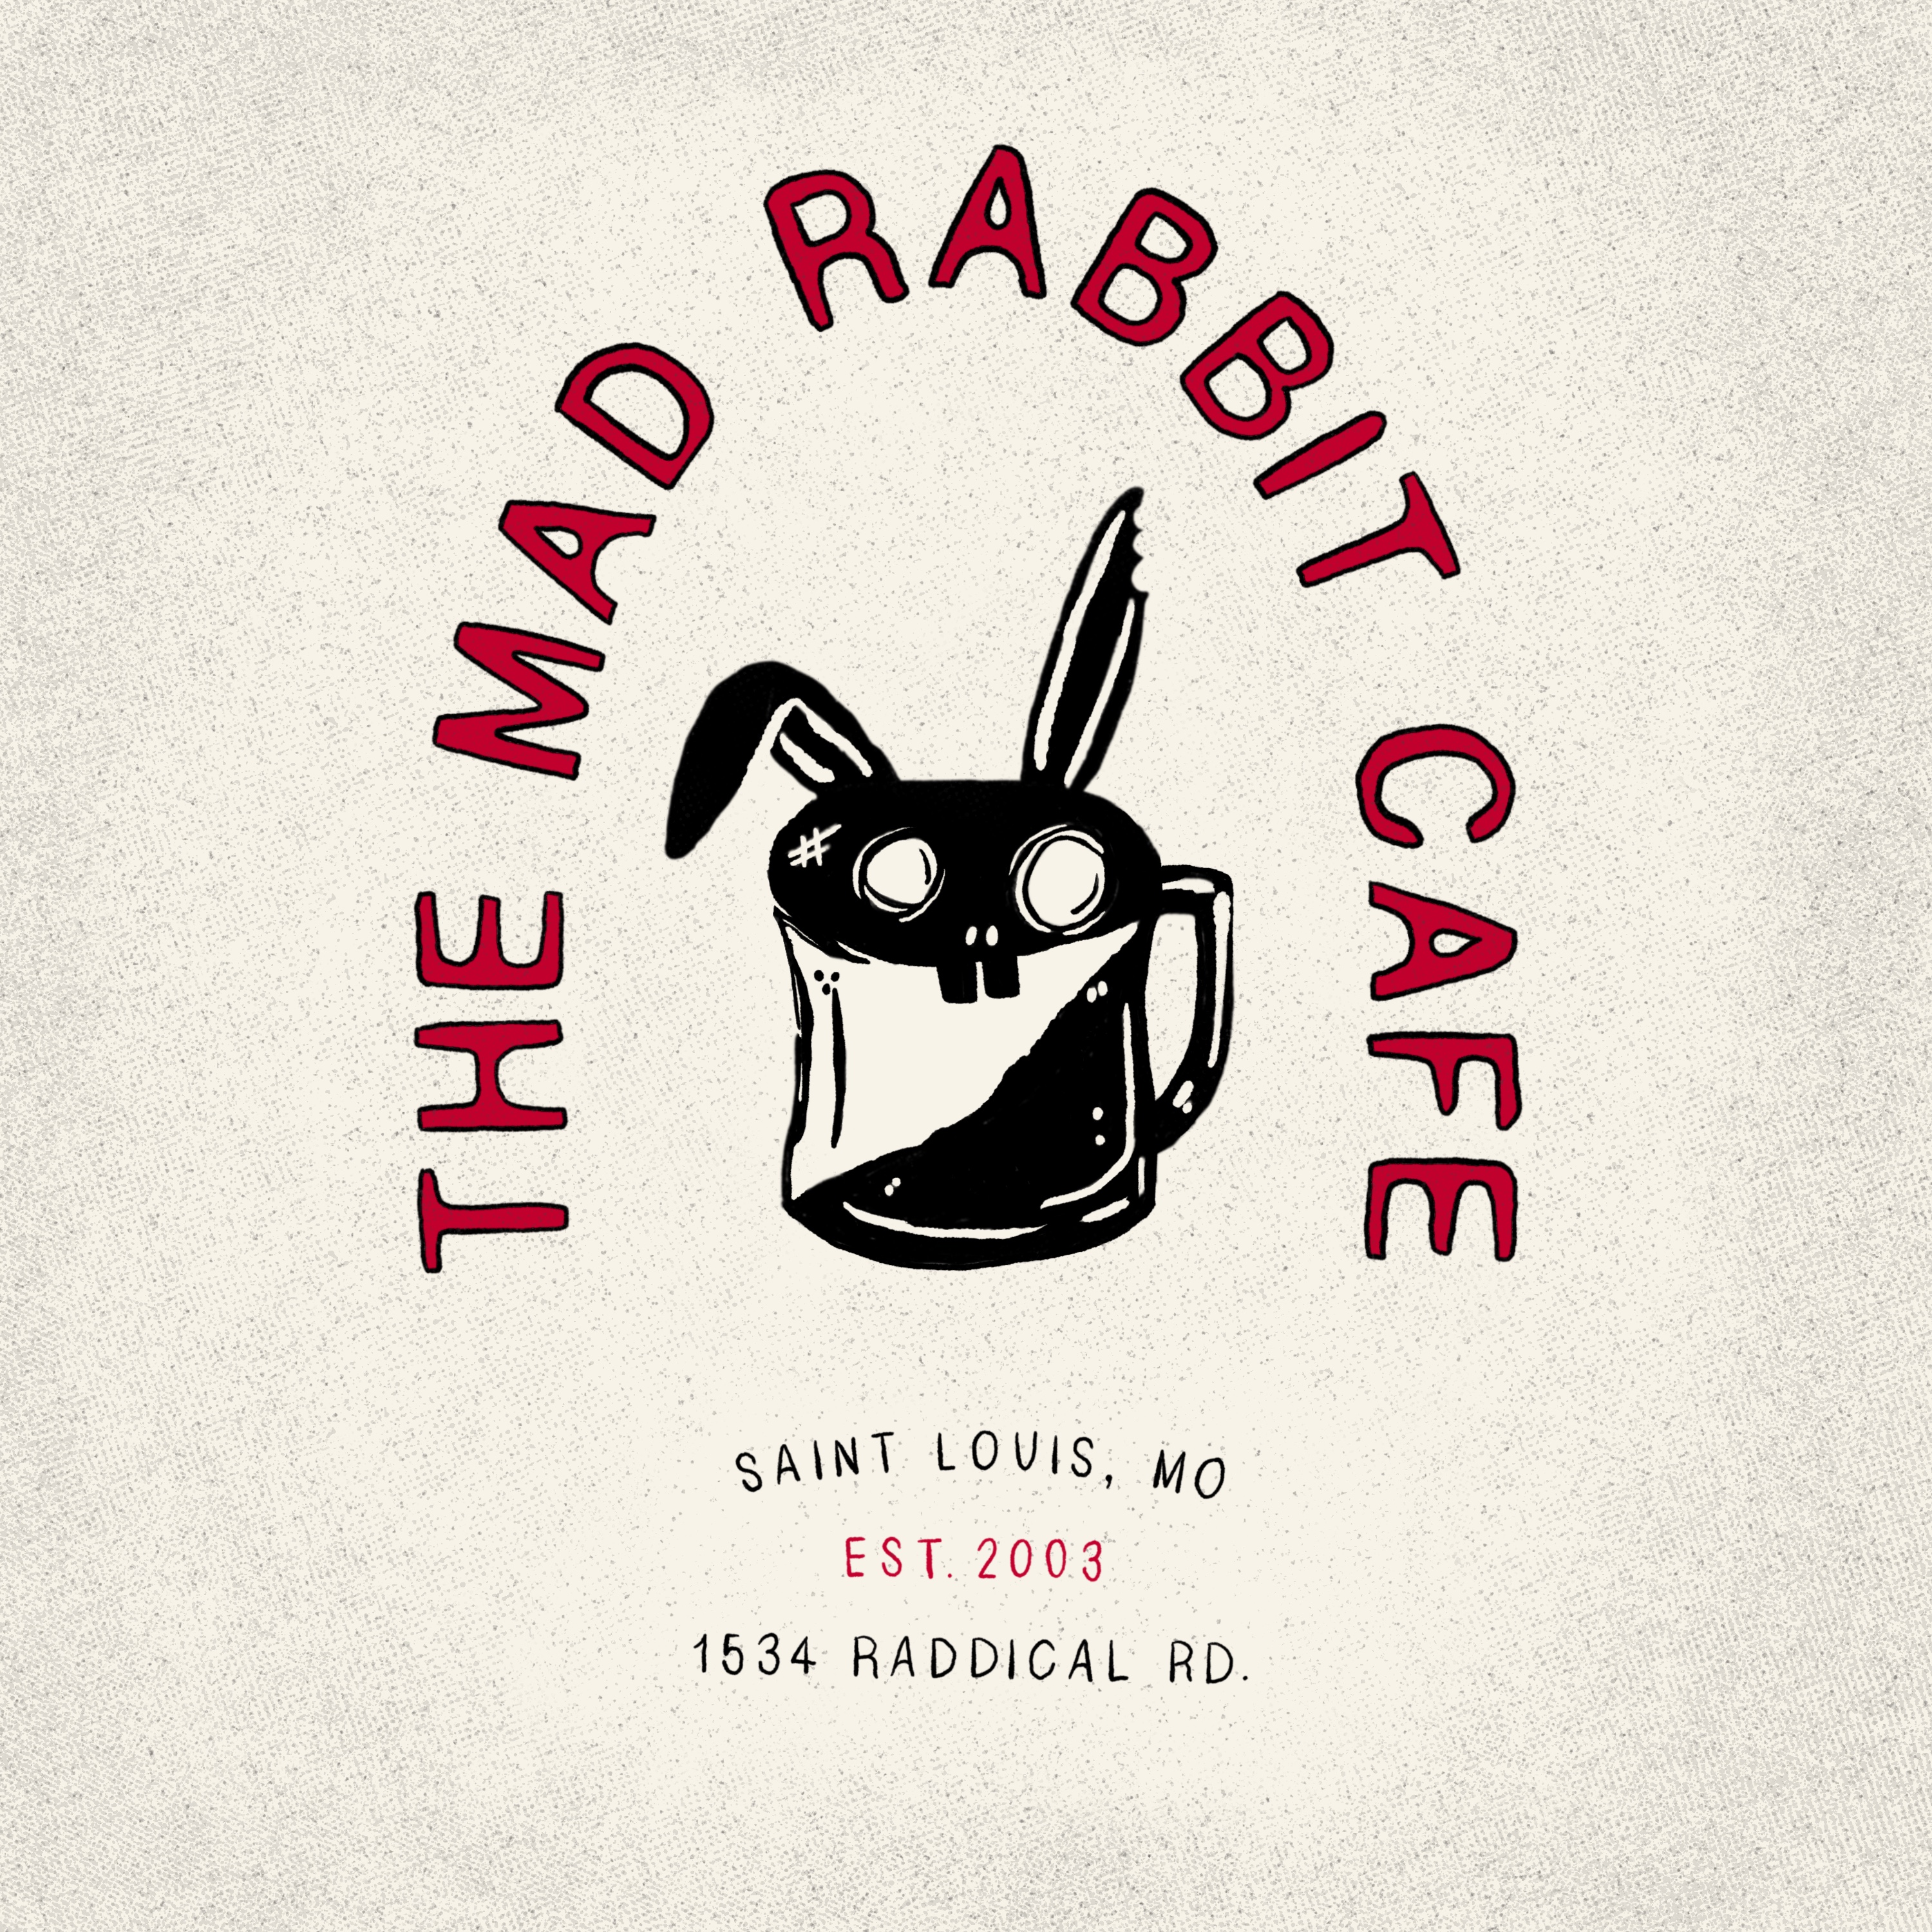  Mad  Rabbit Cafe  by Amber Haake on Dribbble